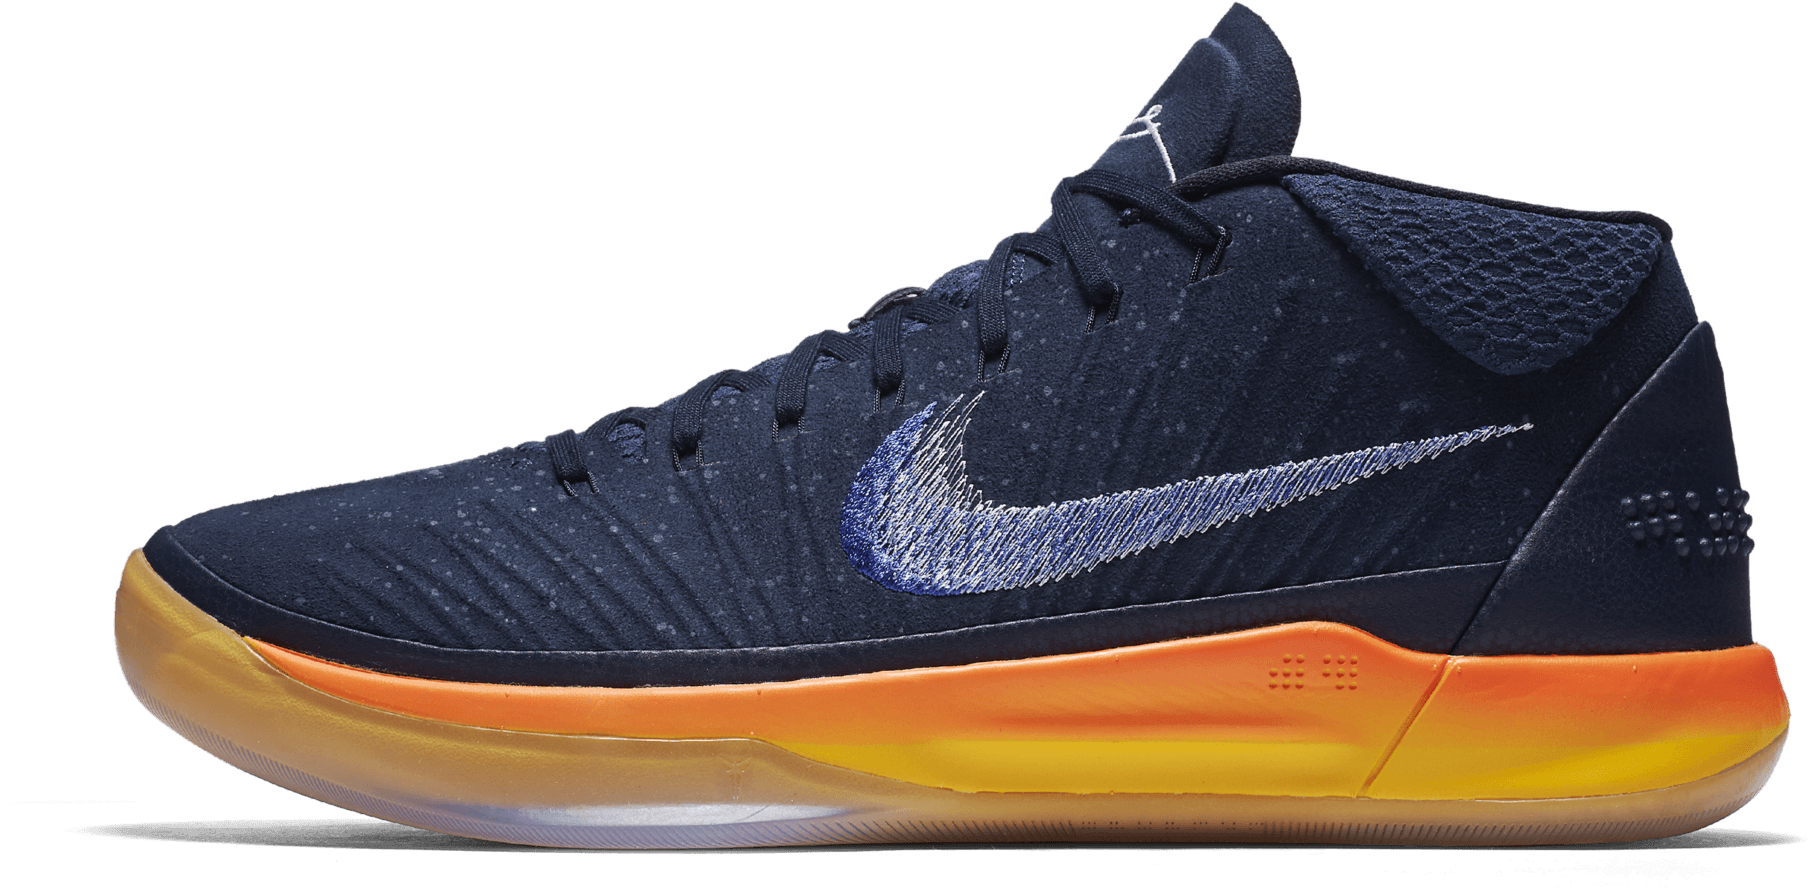 Nike Kobe AD Mid - Review, Deals, Pics of 14 Colorways